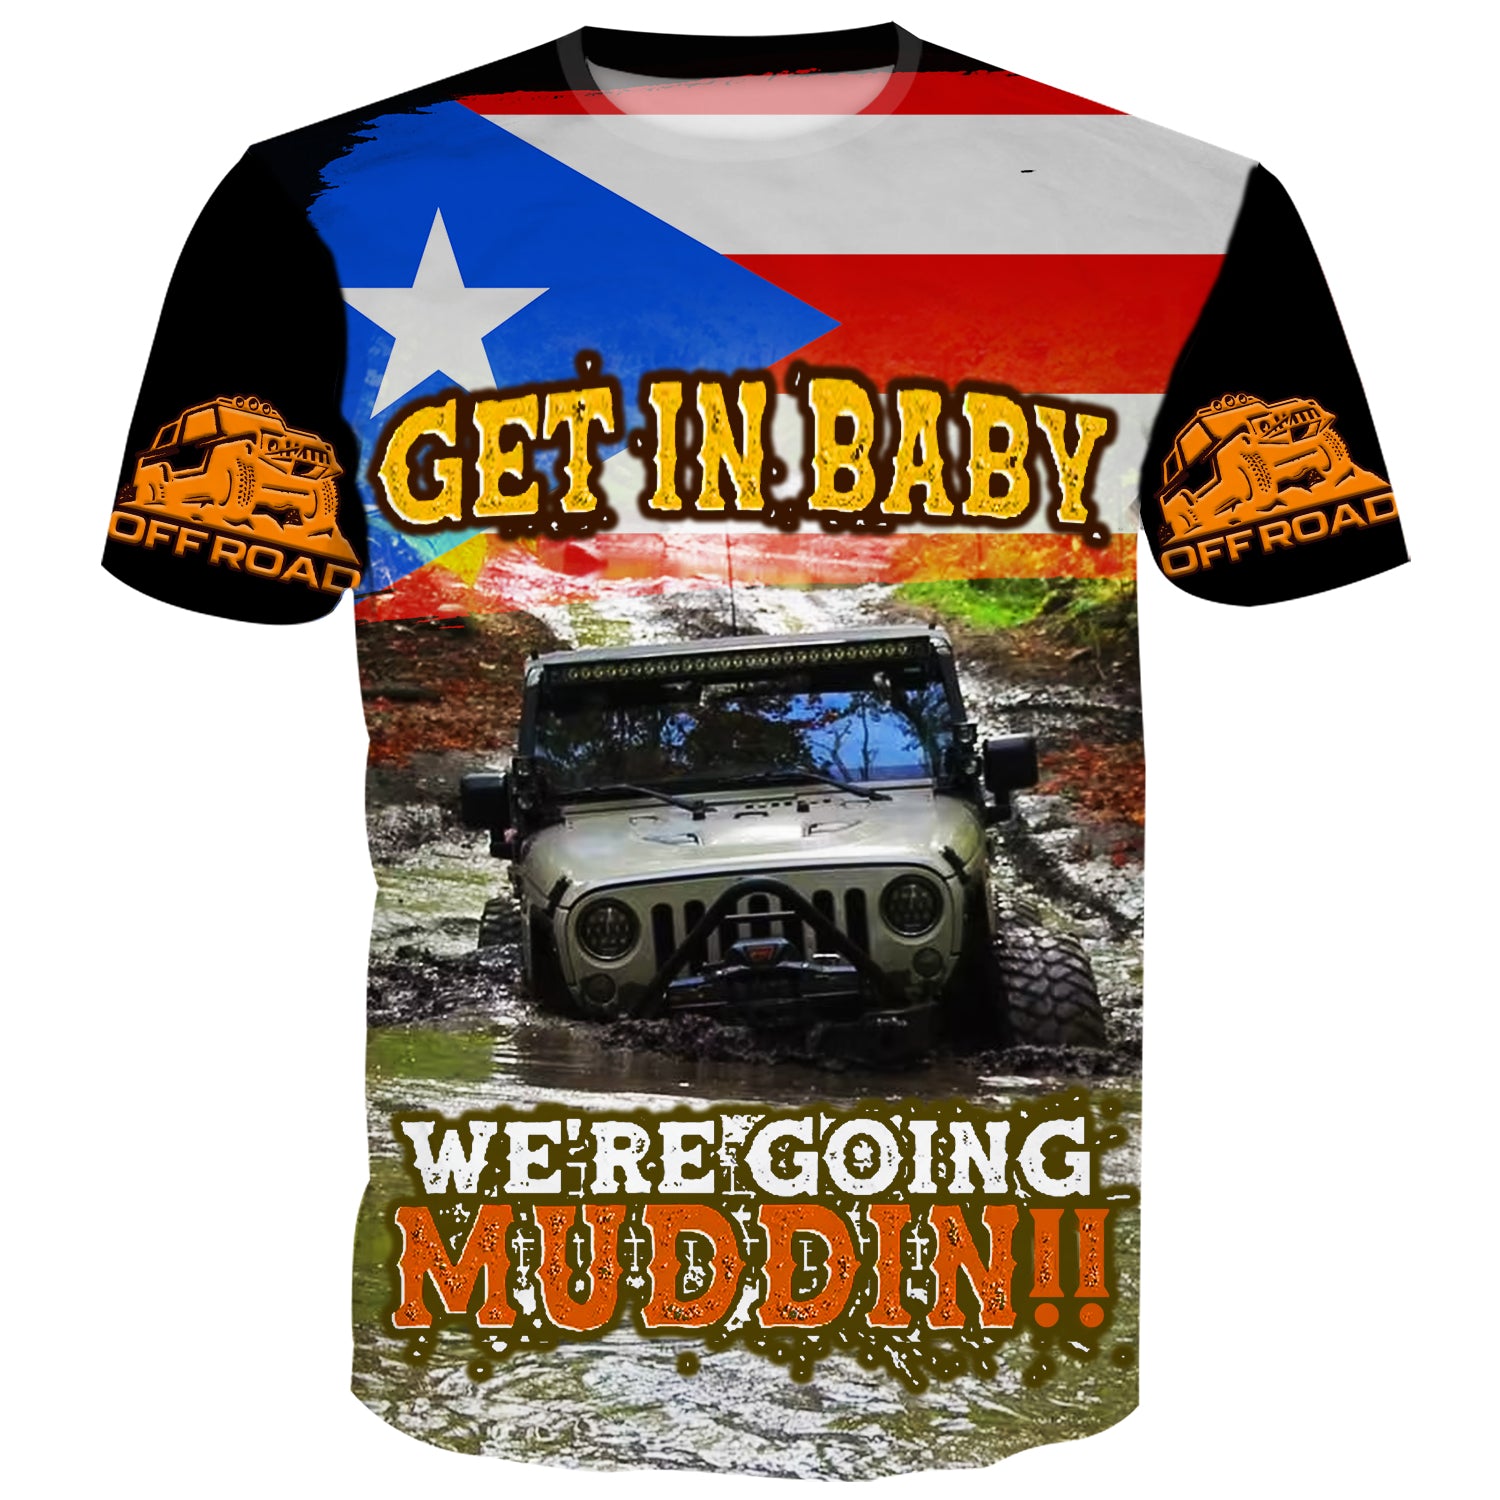 Get in Baby, we're going mudding - Jeep T-Shirt